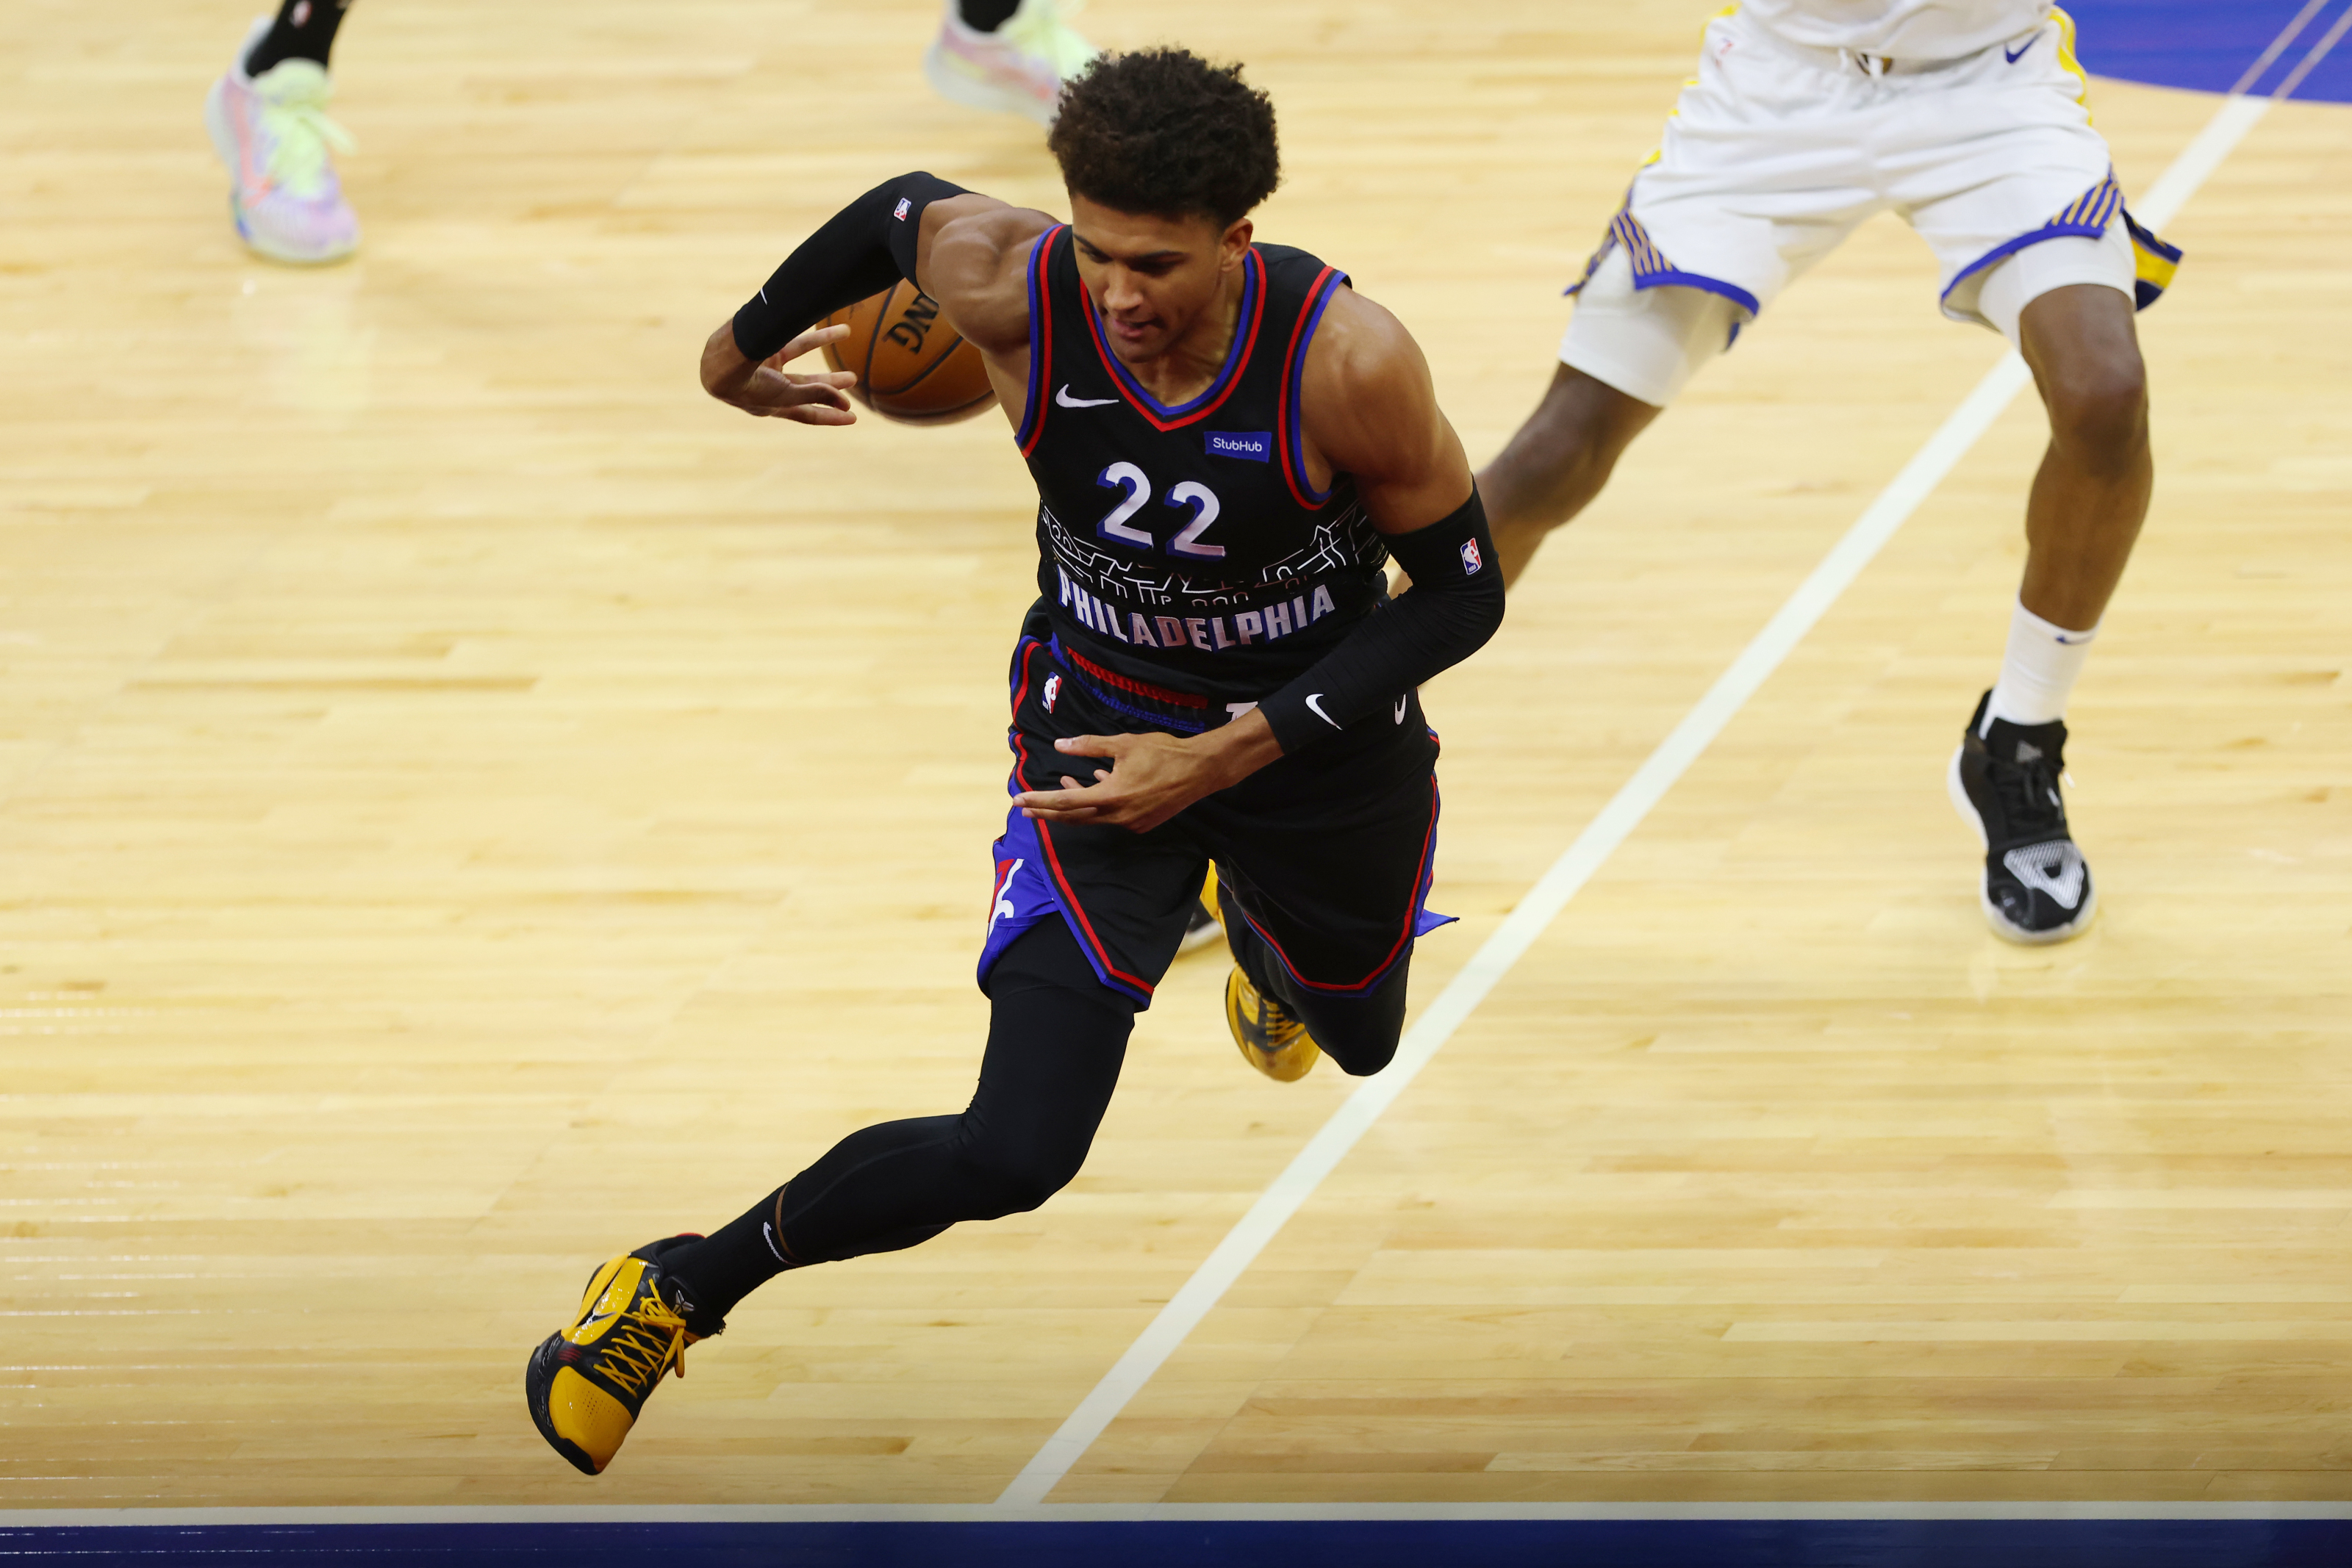 MATISSE THYBULLE IS A BEAST ON DEFENSE !! 